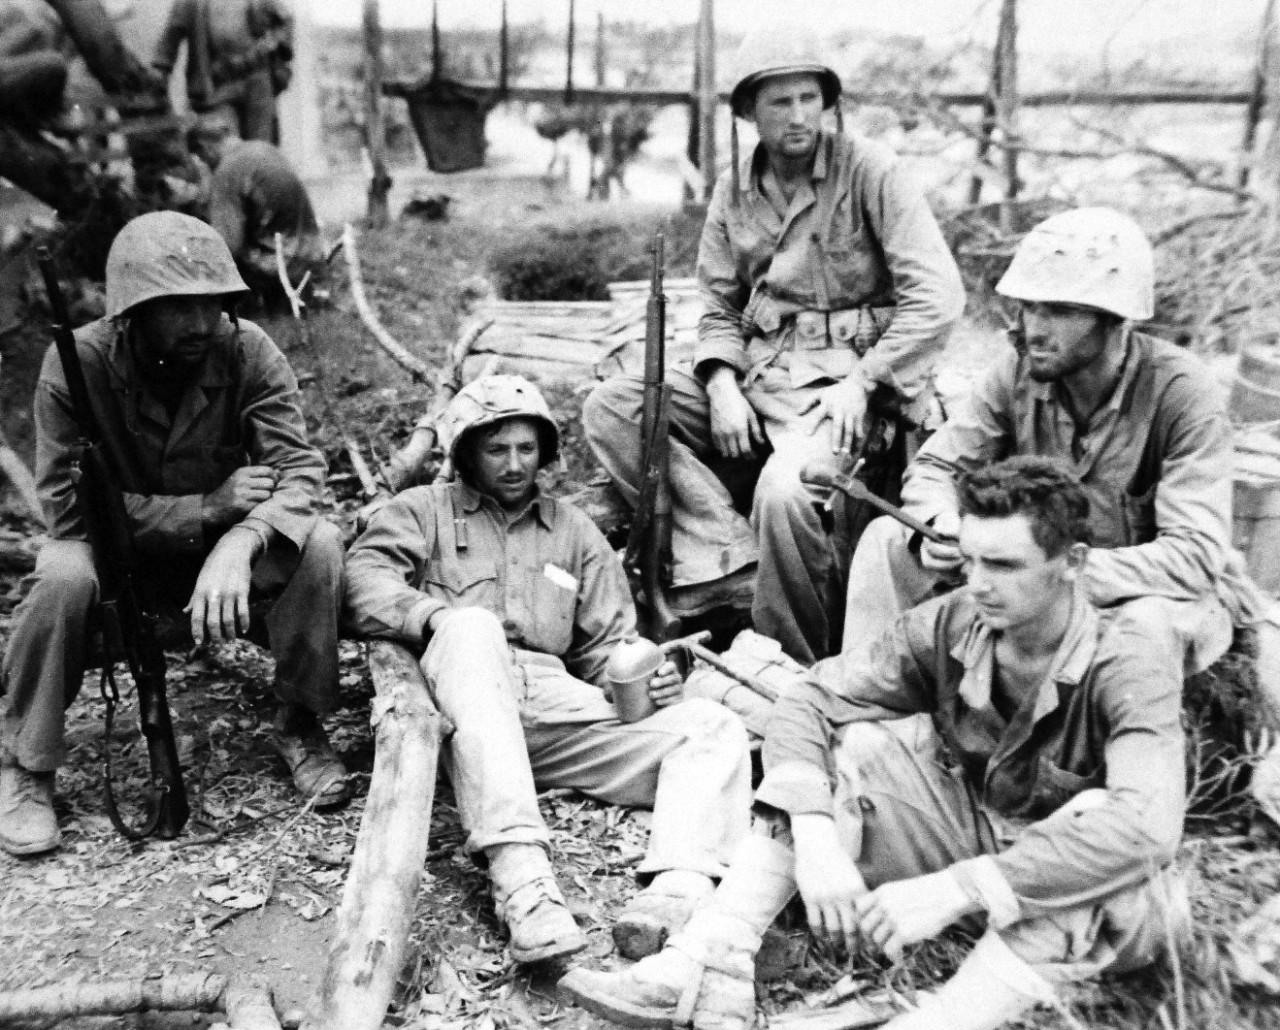 127-GW-518-122835:   Okinawa Campaign, April-June 1945.     A group of tired Marines of 22nd Regiment shortly after they were relieved.  They had up to this time spent 62 days on Okinawa, 25 of which were on the Southern front.   Photographed by MacIntosh, 2 June 1945.  Official U.S. Navy Photograph, now in the collections of the National Archives.   (2014/6/25). 